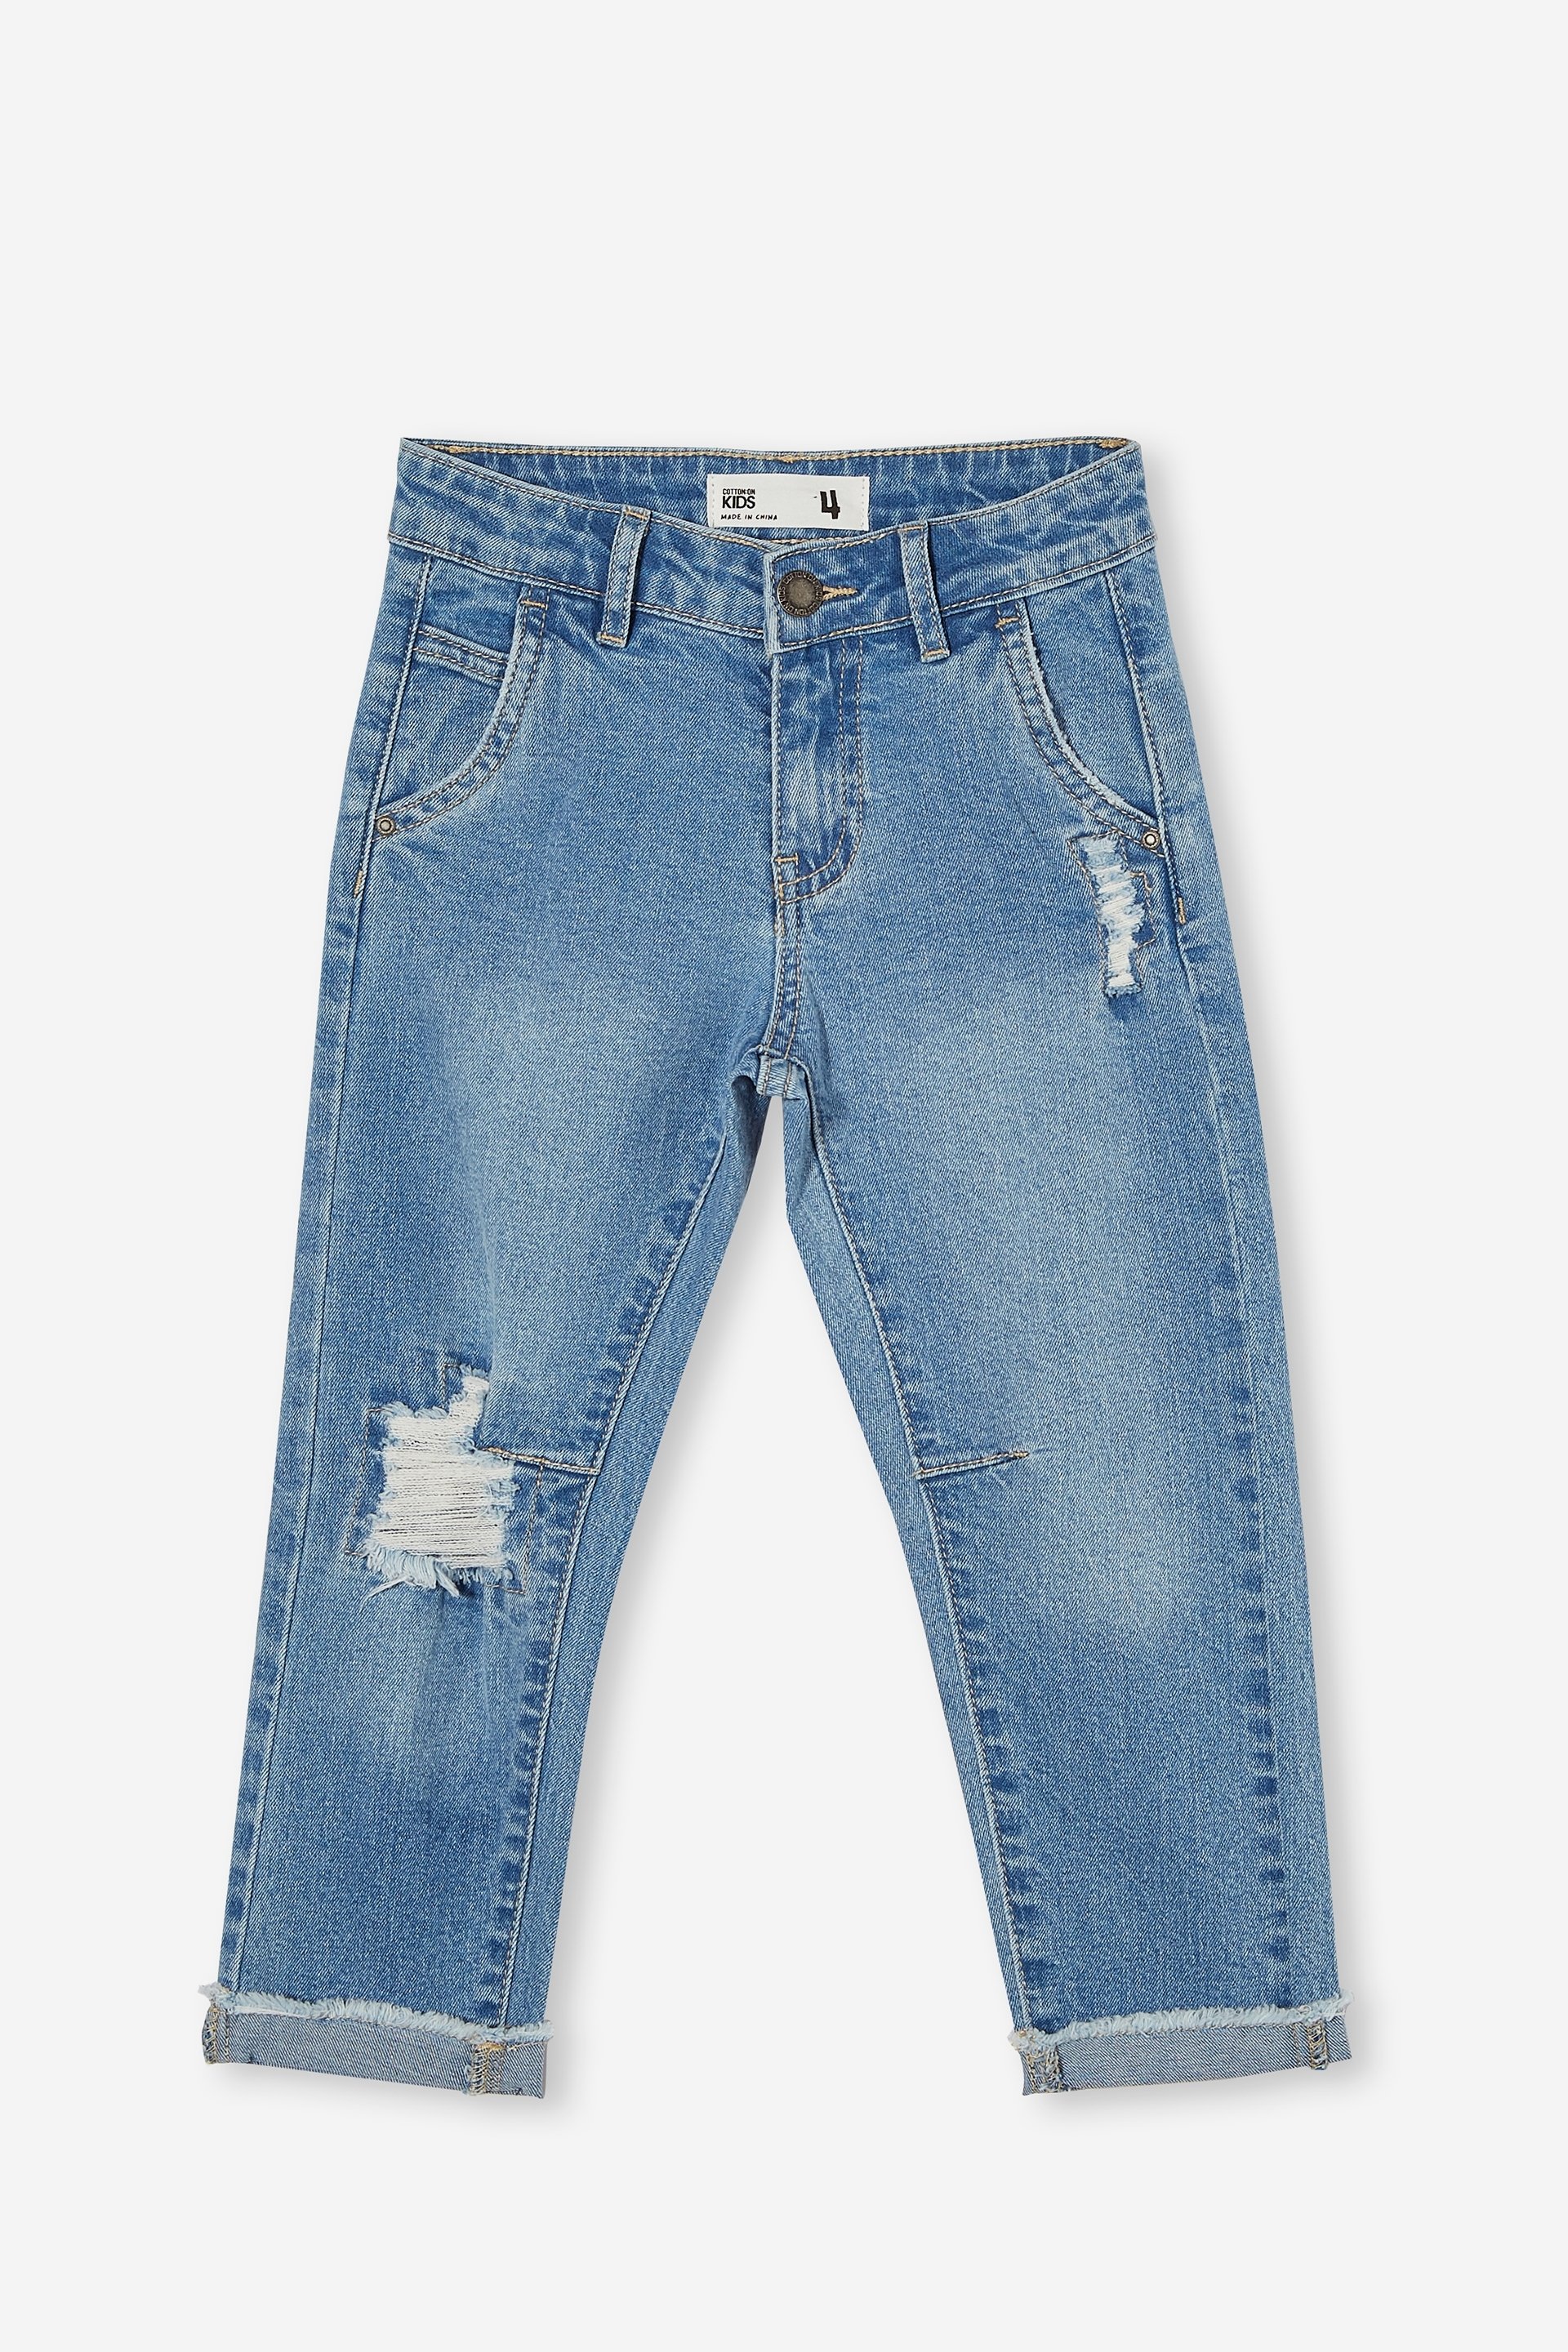 Cotton On Kids - Straight Fit Jean - Byron mid blue